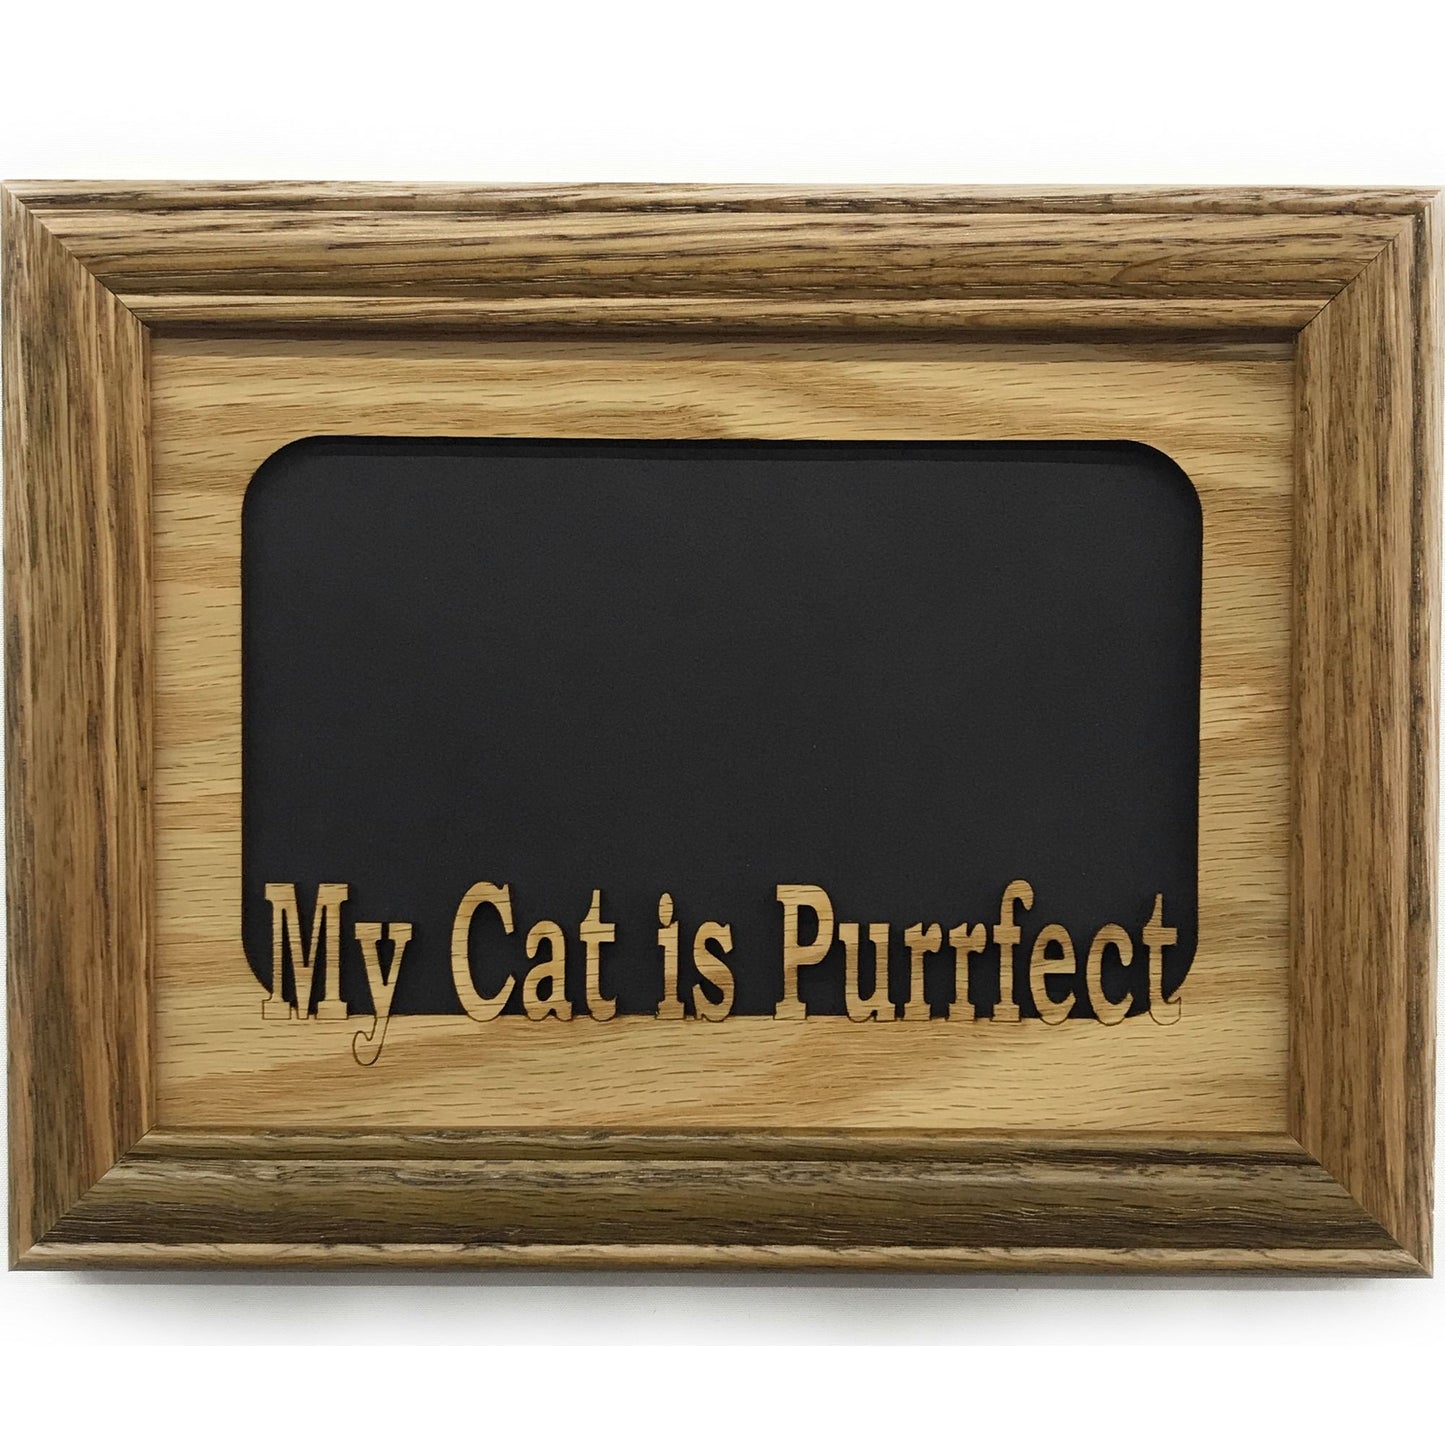 My Cat is Purrfect Picture Frame - 5x7 Frame Hold 4x6 Photo